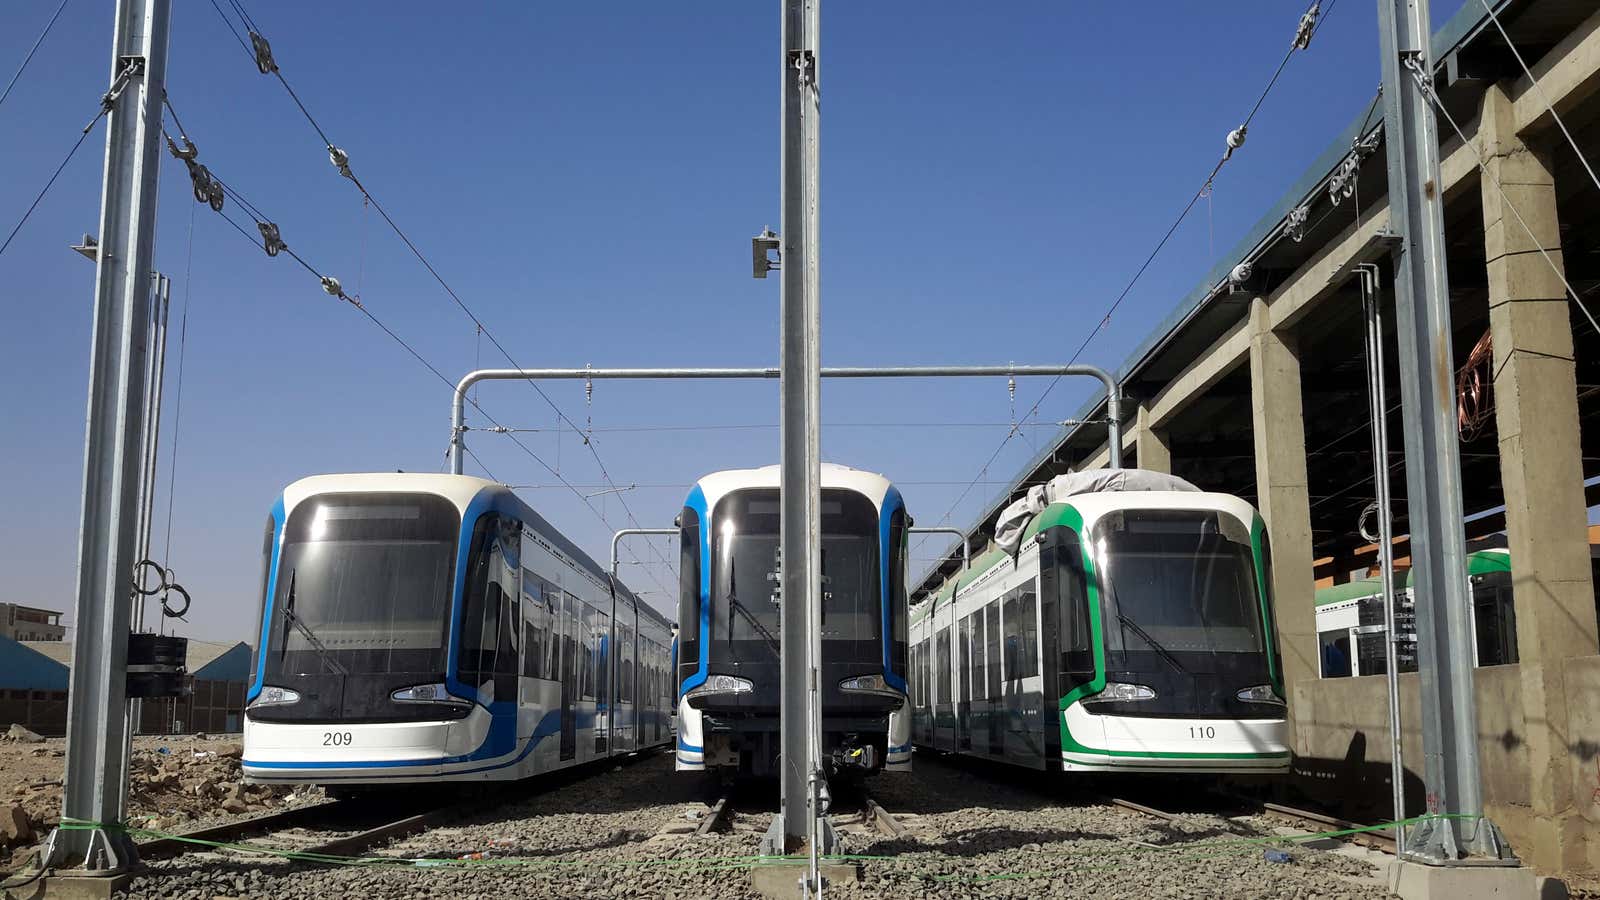 Three Chinese trams in Addis Ababa